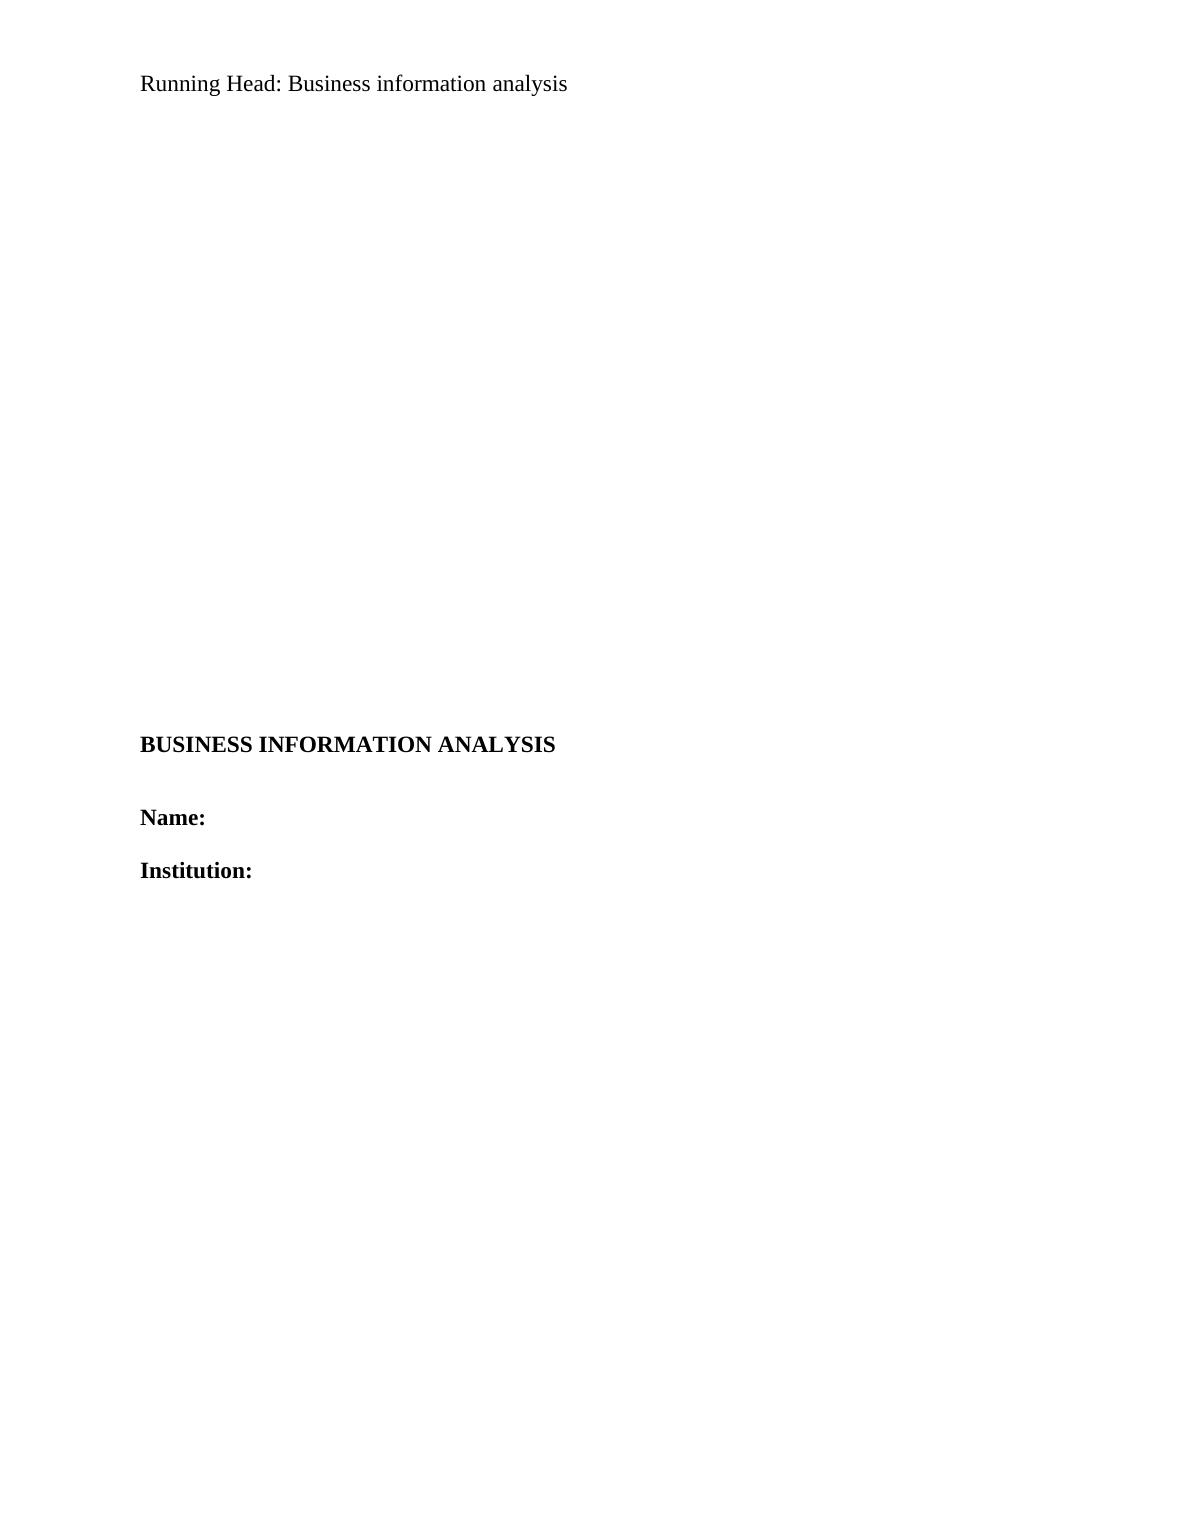 Business Information Analysis - Assignment_1